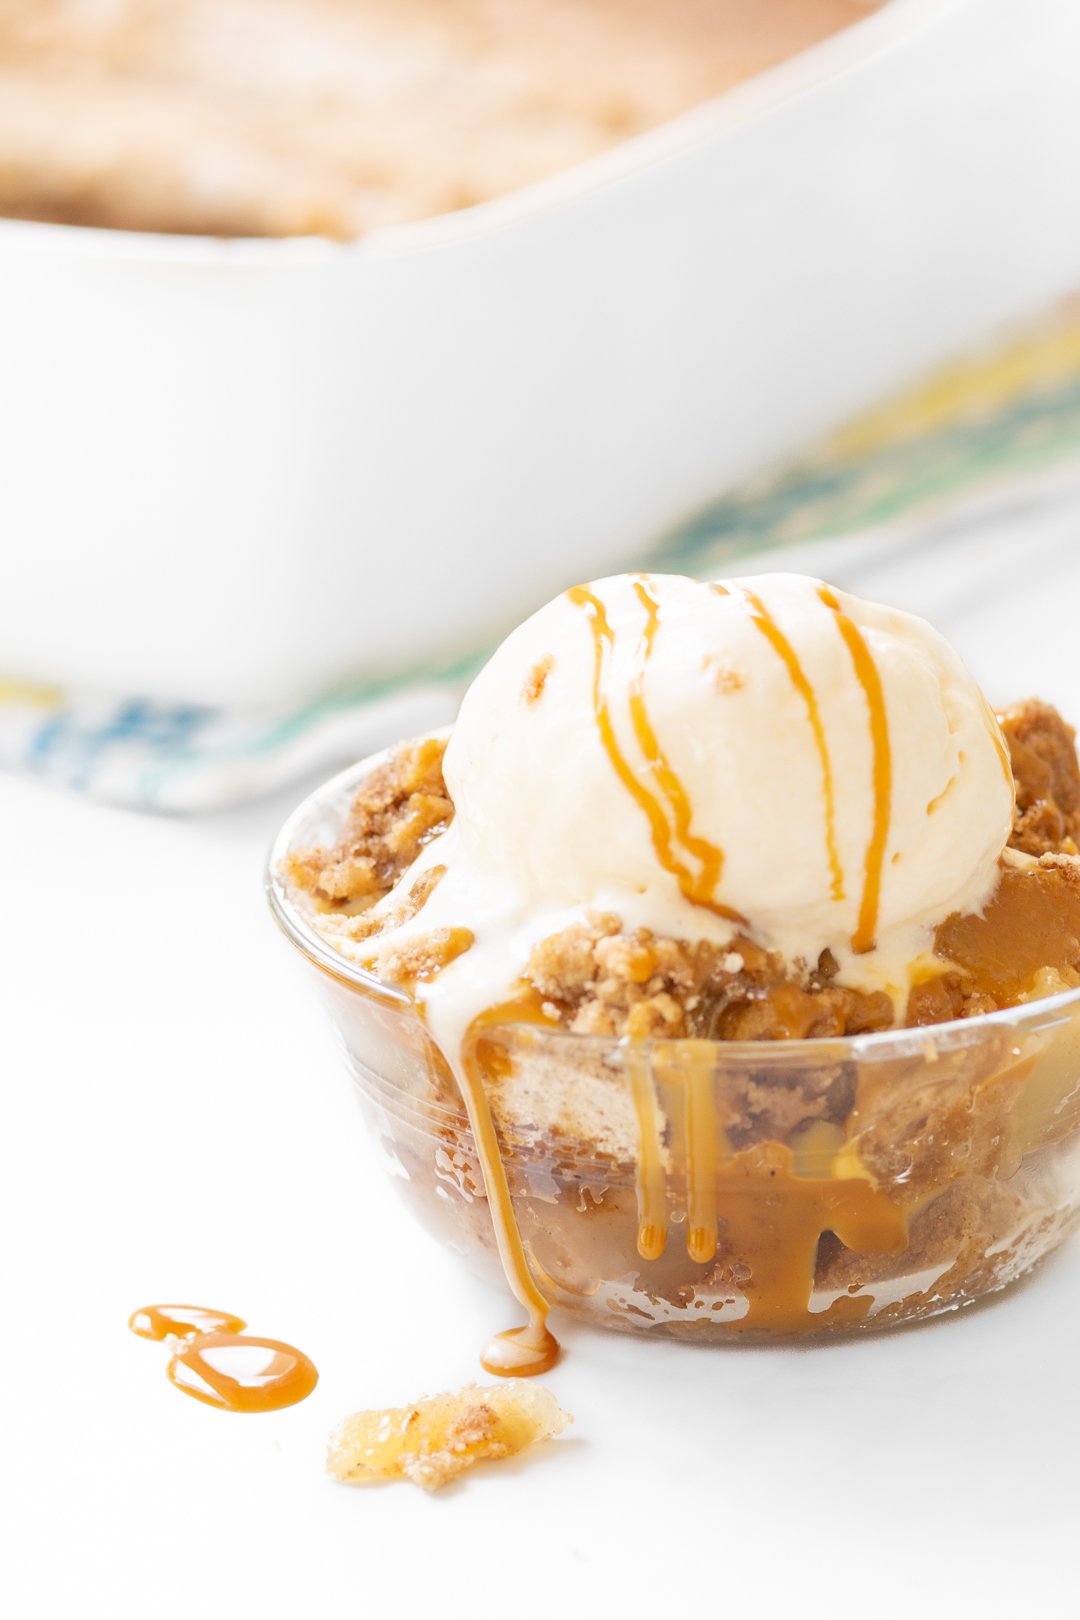 dump cake in a dish with ice cream and caramel on top